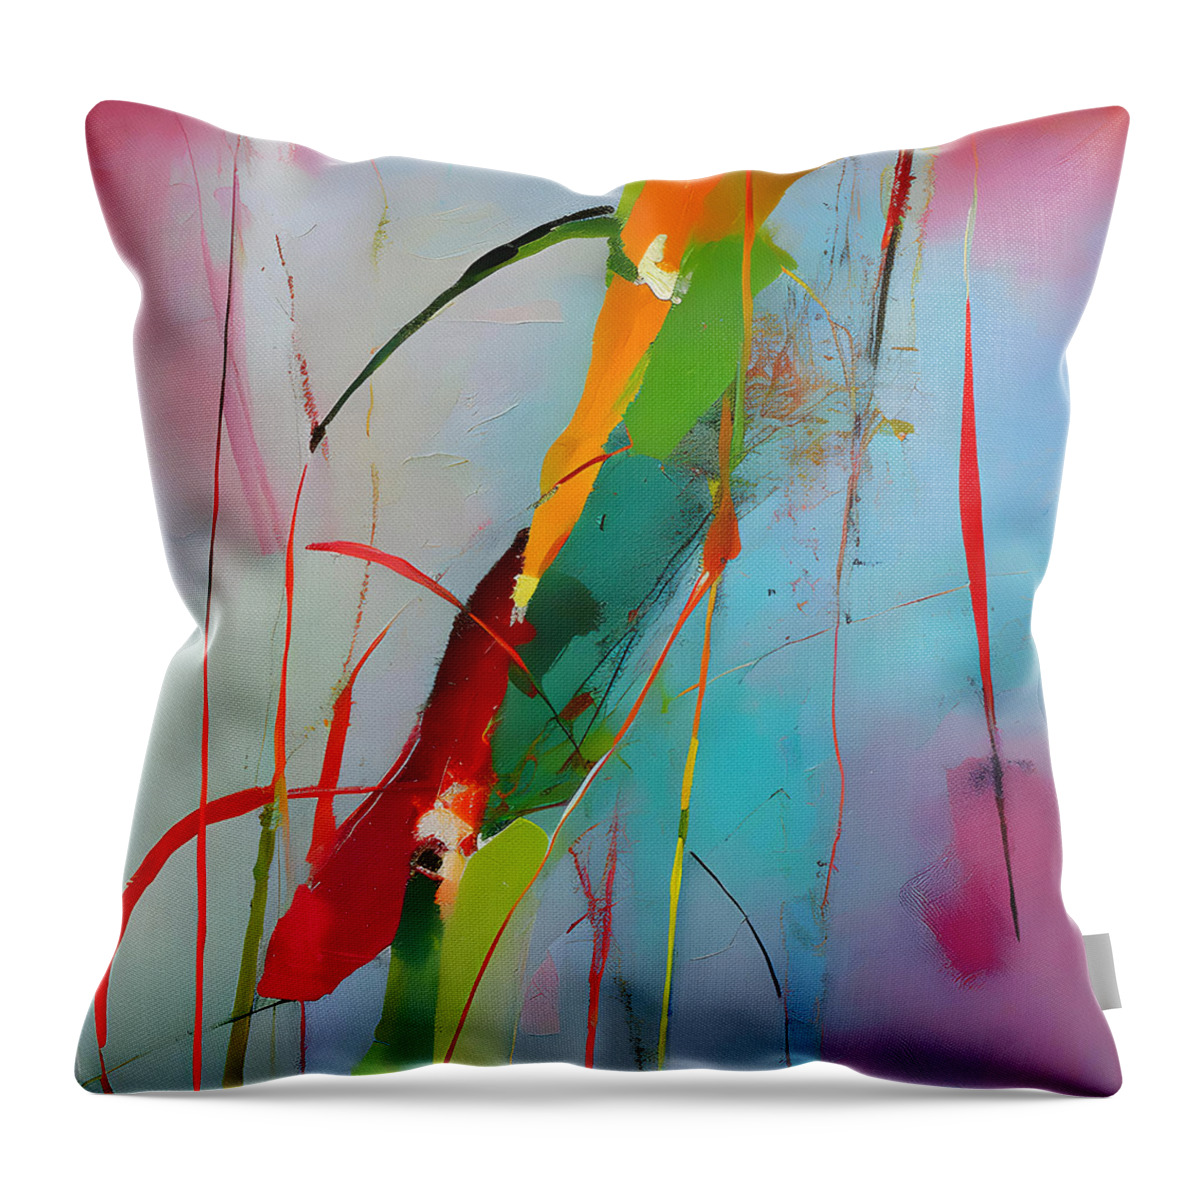 Abstract Throw Pillow featuring the painting Colorful Funky Modern Abstract by Abstract Factory